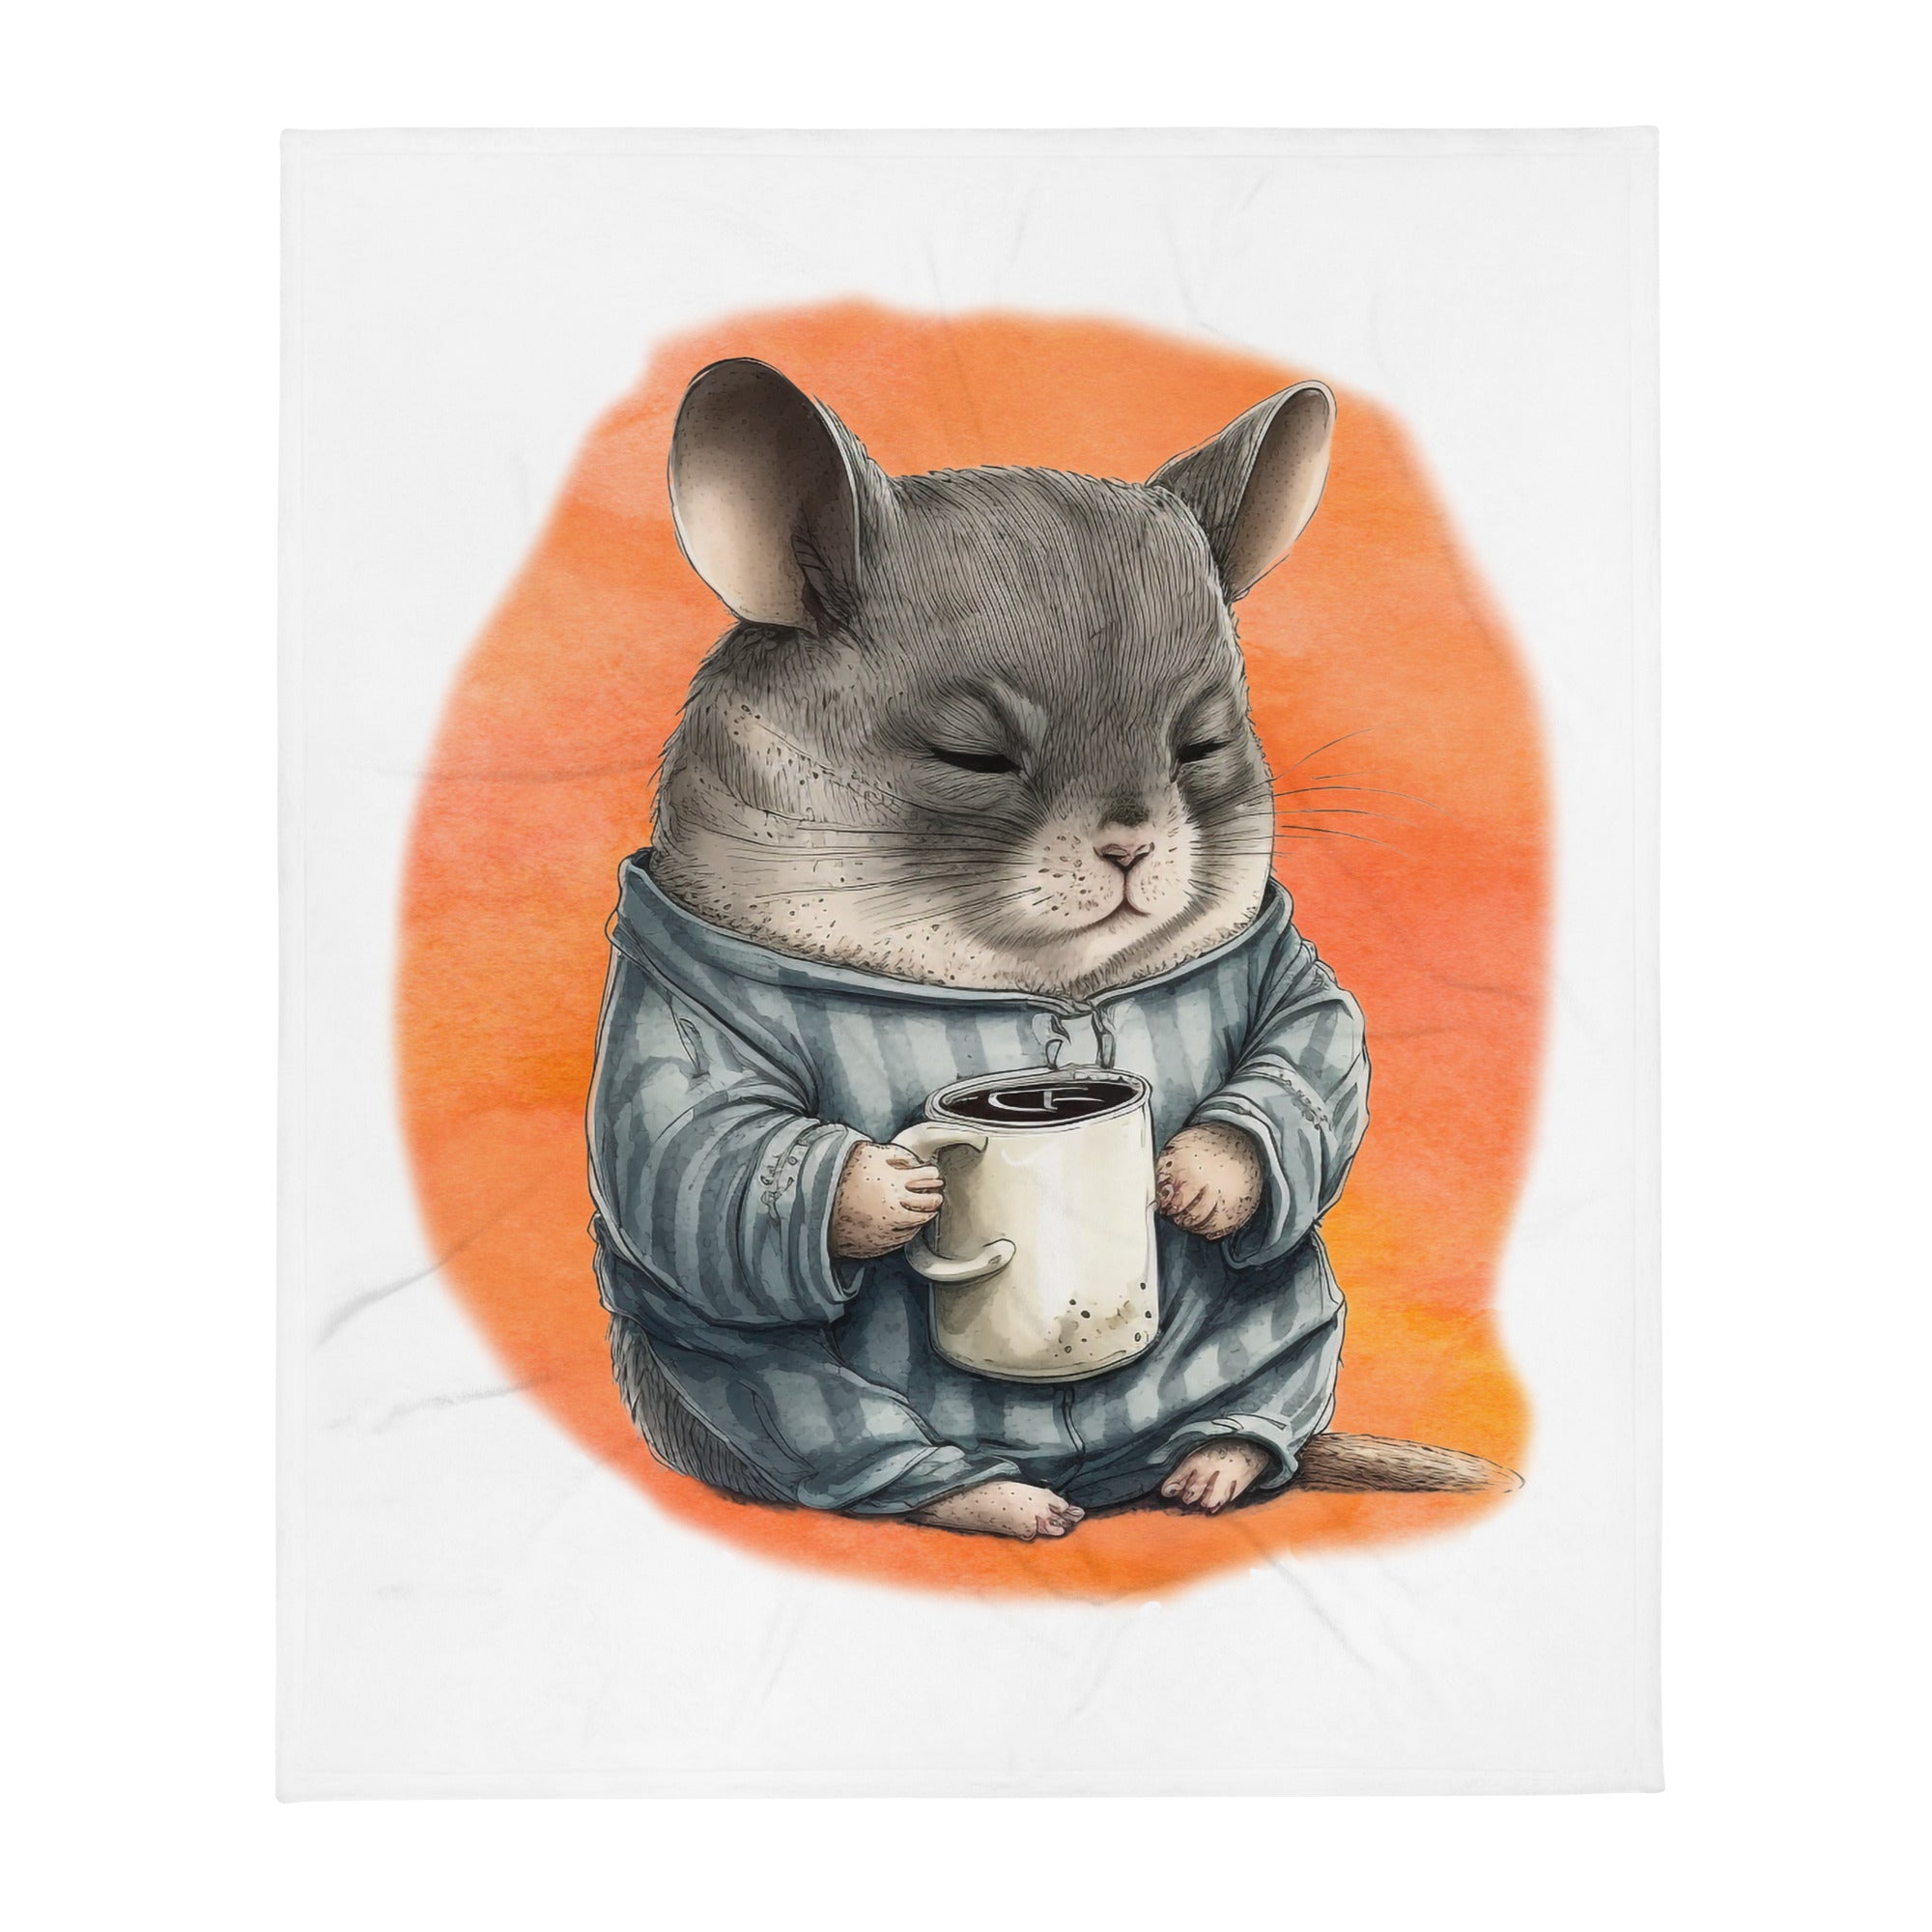 Sleepy Chinchilla 100% Polyester Soft Silk Touch Fabric Throw Blanket - Cozy, Durable and Adorable